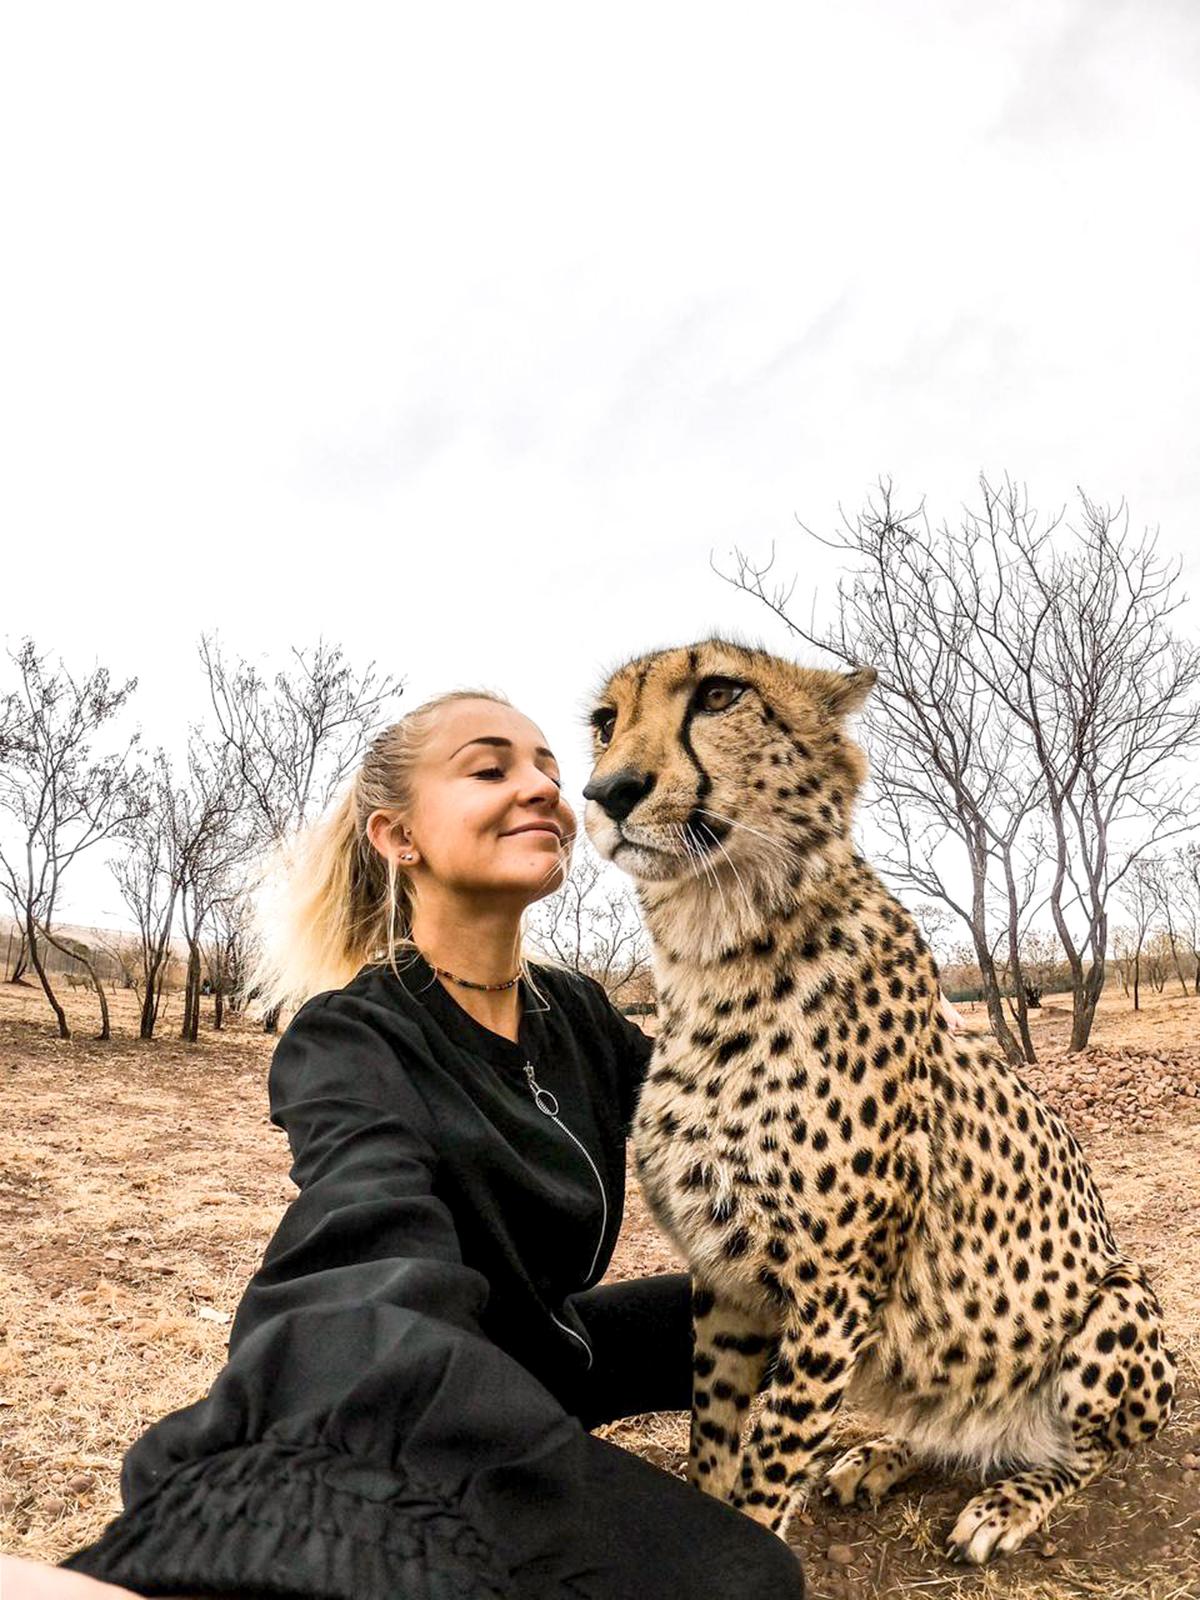 Kristen Kerr hanging out with a cheetah. (Caters News)